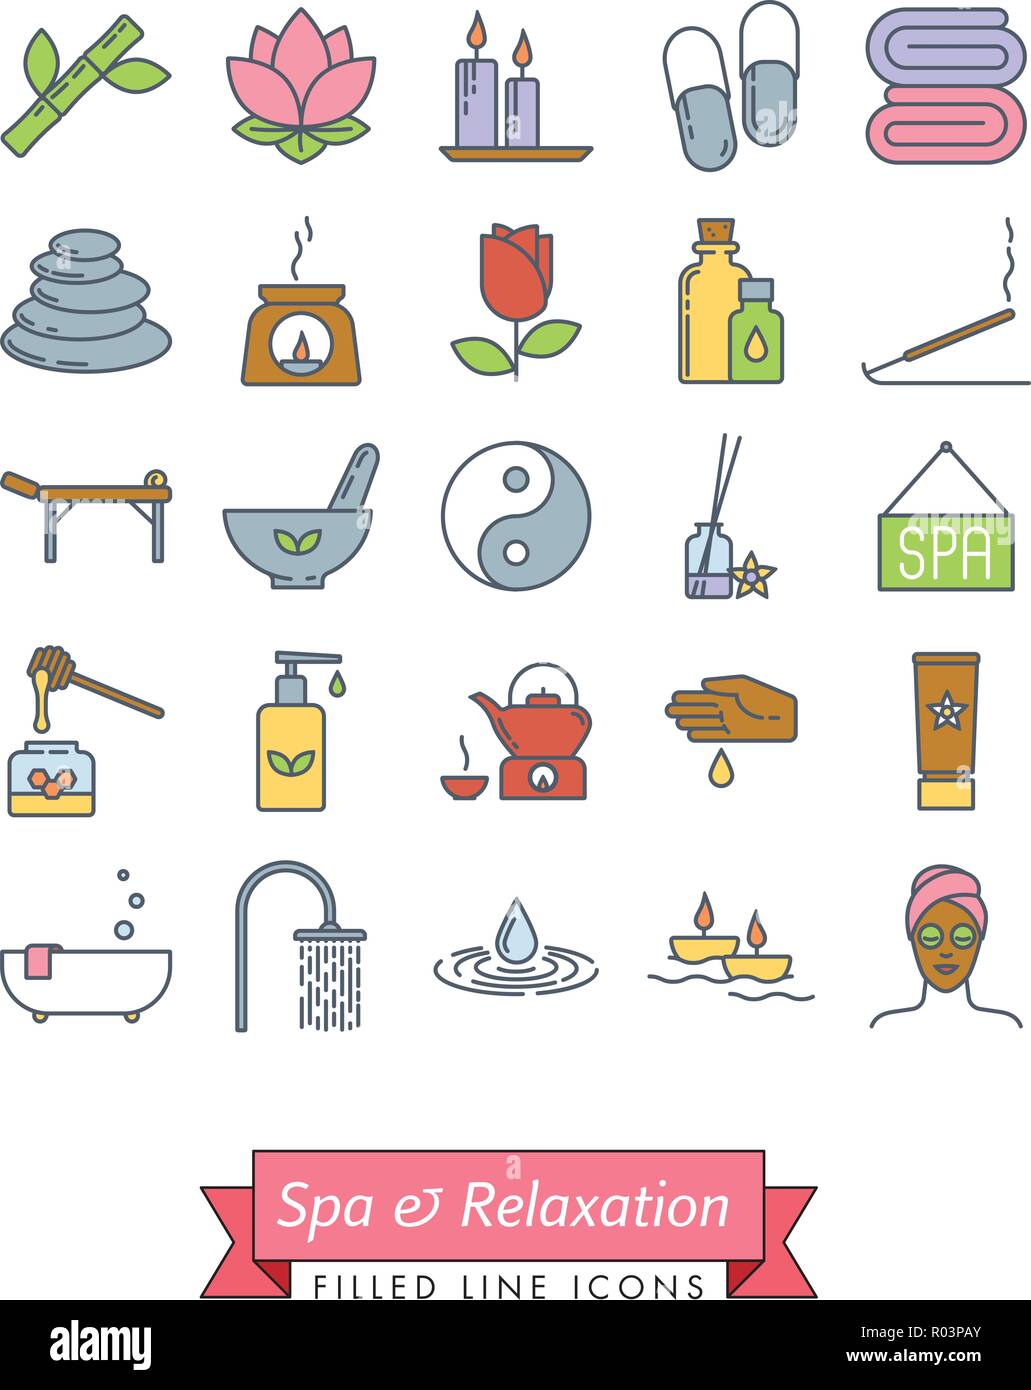 Spa, aromatherapy and herbal medicine vector filled line icon collection. Set of 25 symbols. Stock Vector